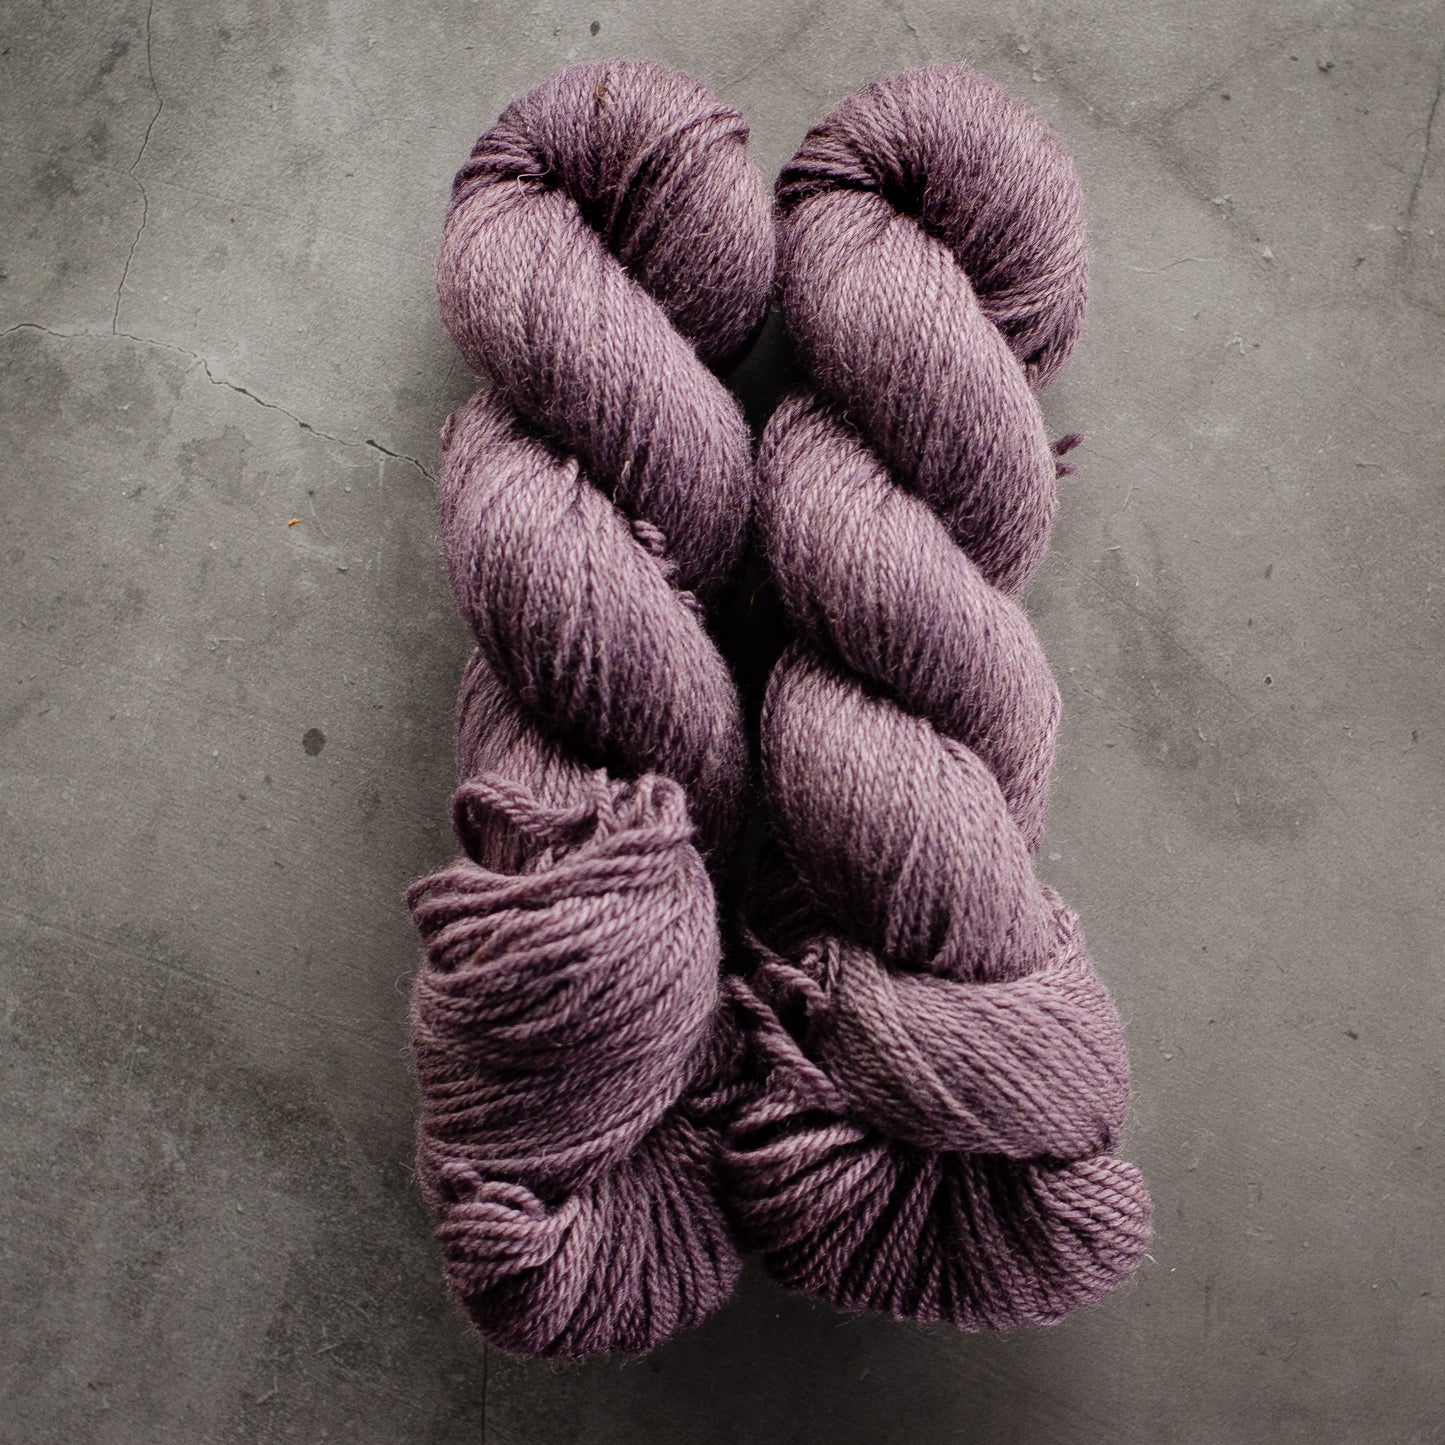 Tufts | Revival DK | *NEW*